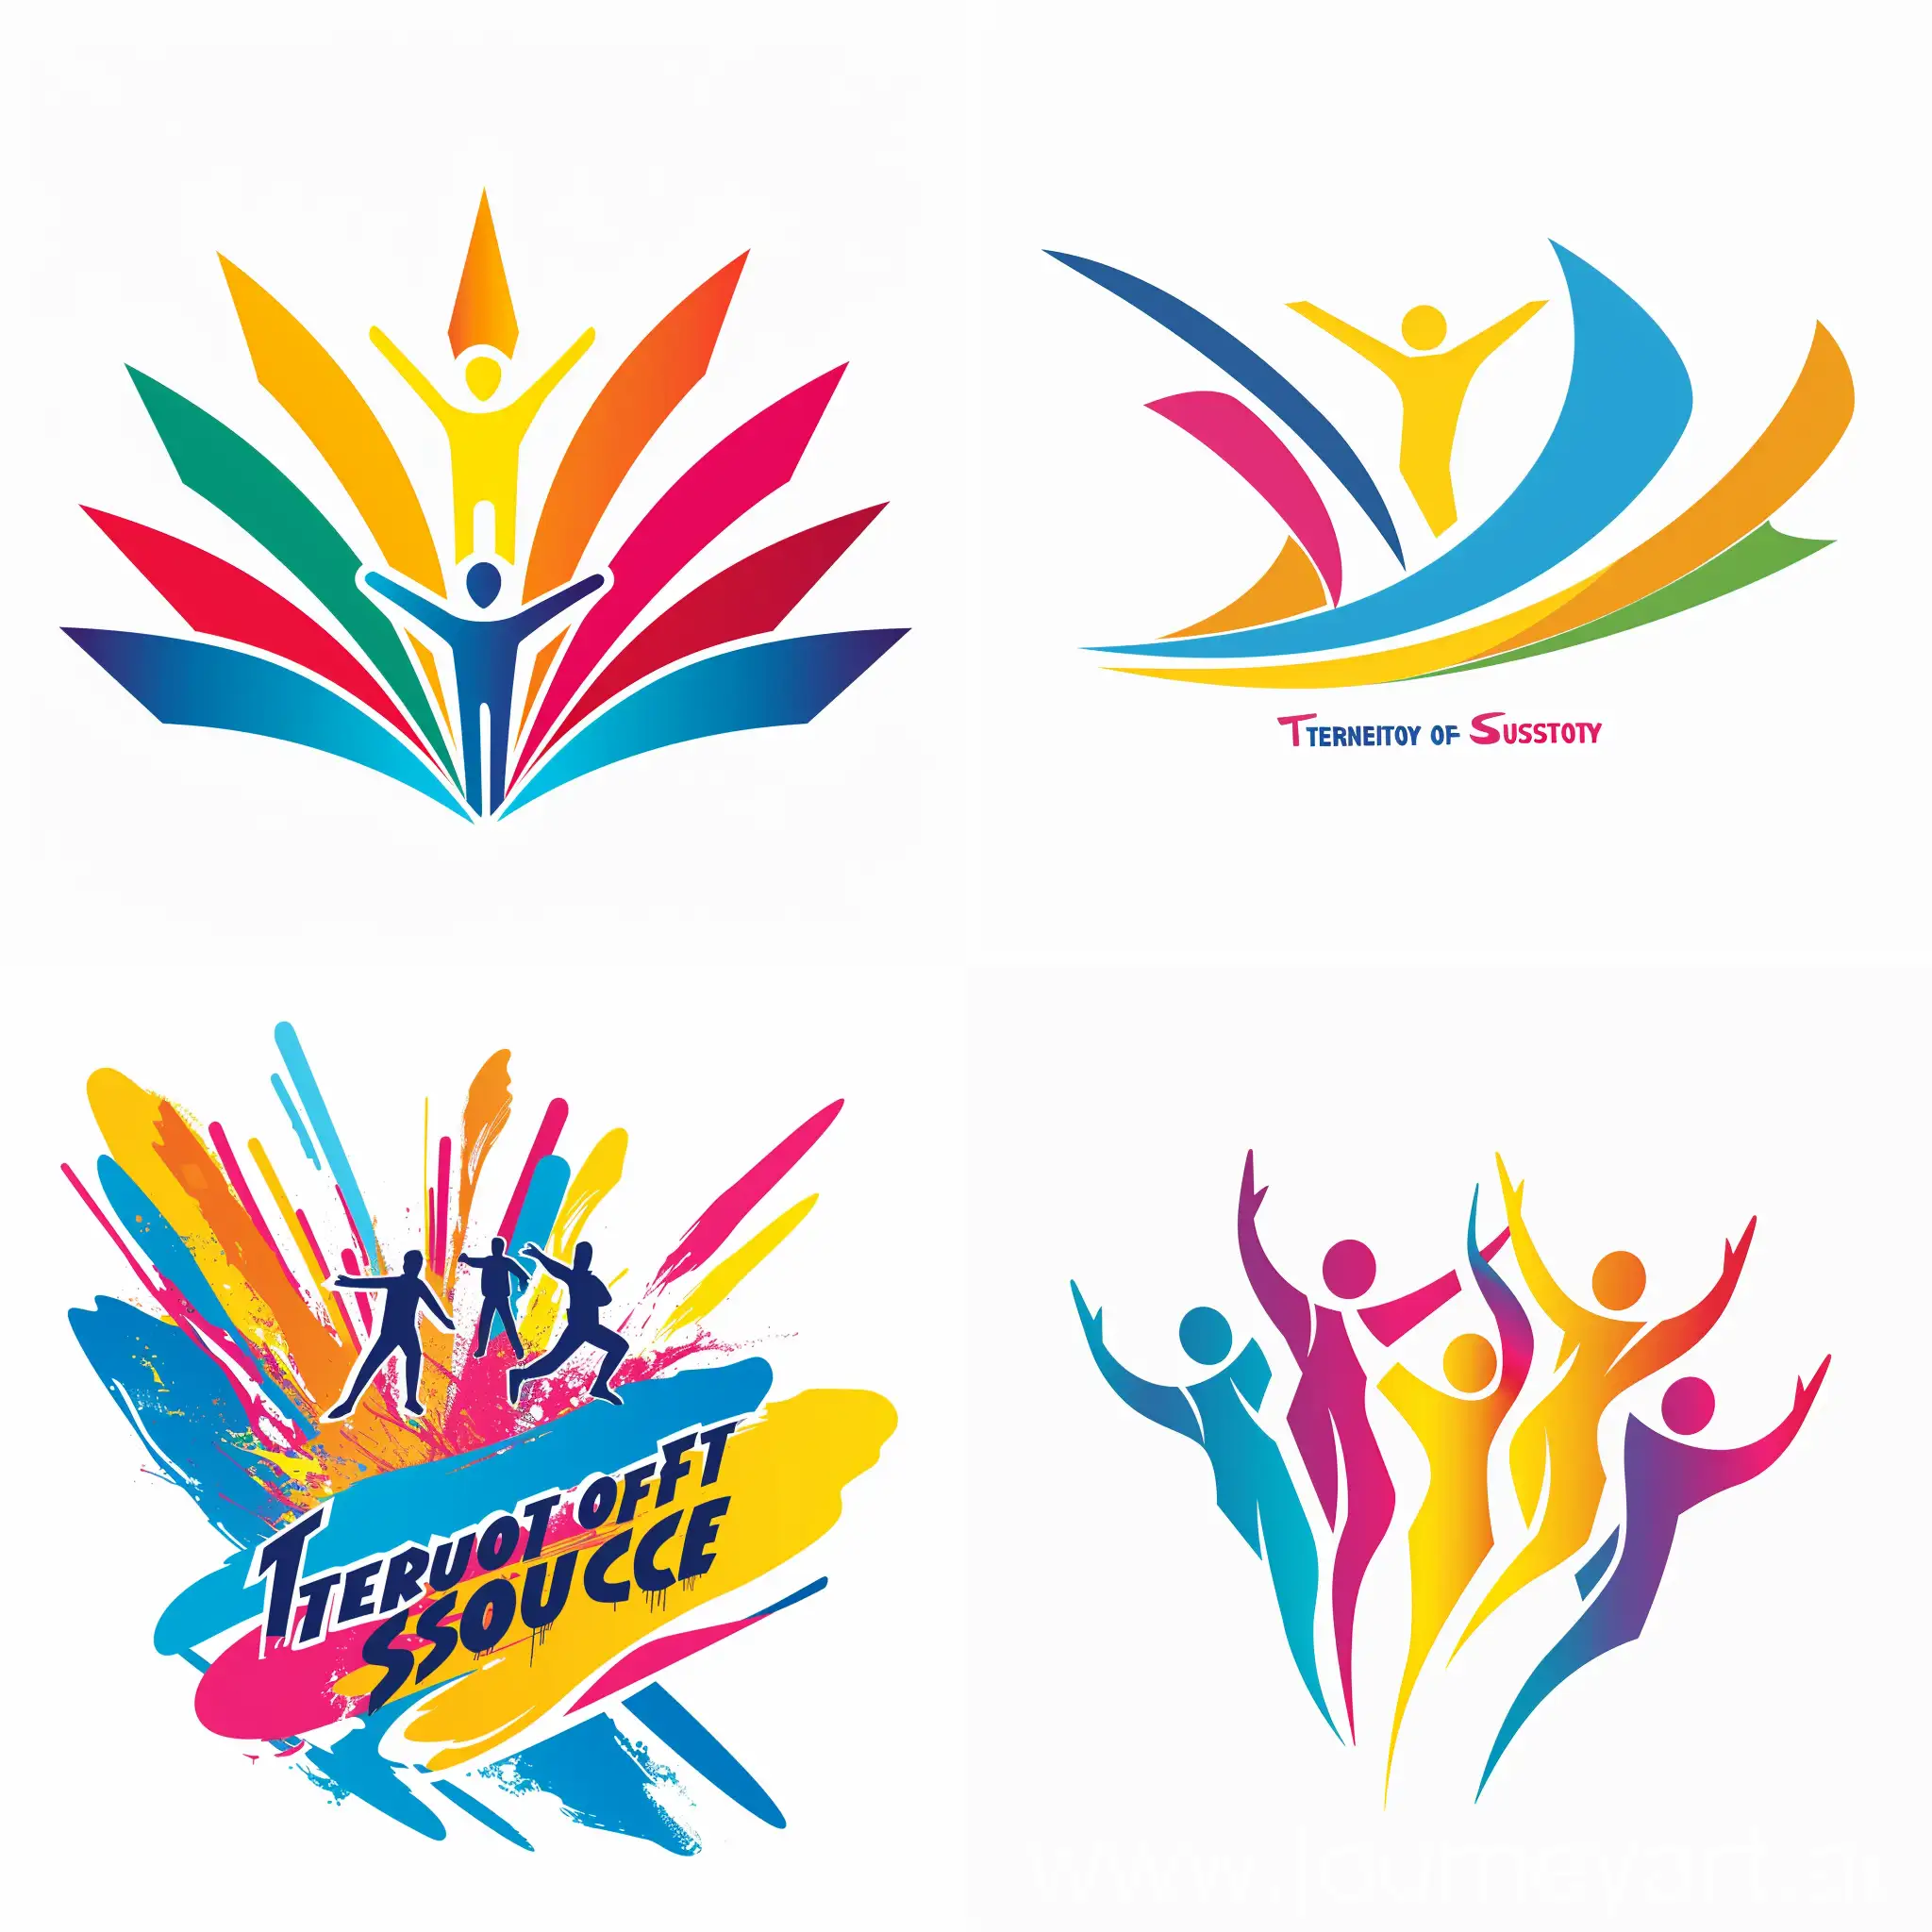 Generate a minimalist, colorful logo for a federal project called "Territory of Success", where successful people will take to the stage and share their success stories. The logo should evoke emotions of joy, fun, and movement. Use sharp shapes and no more than five bright colors on a white background. Do not use people in the logo.